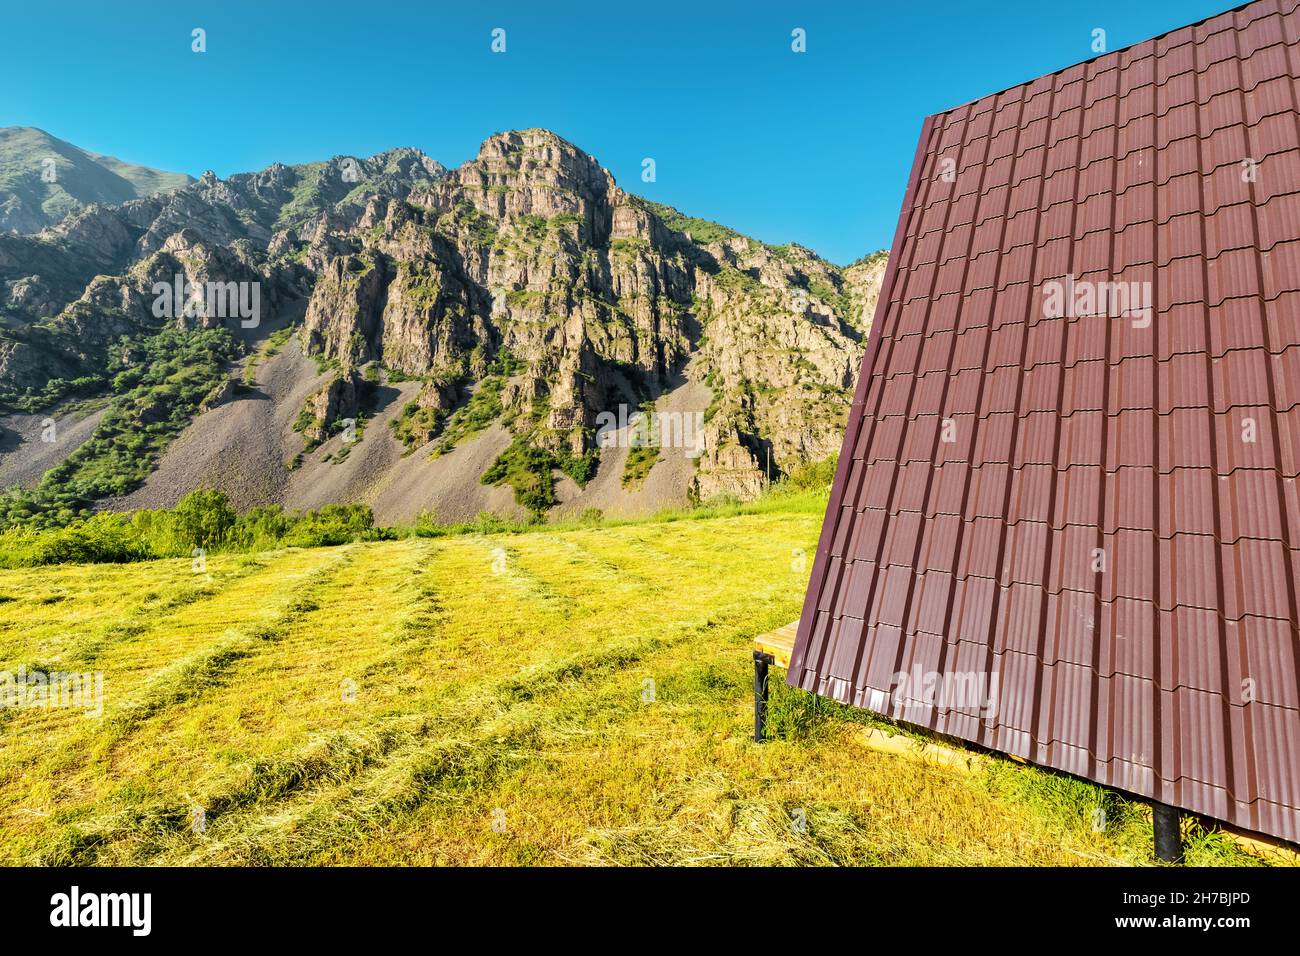 view of a small wooden chalet house roof in the mountains. Concept of glamping and idyllic holidays outdoors Stock Photo